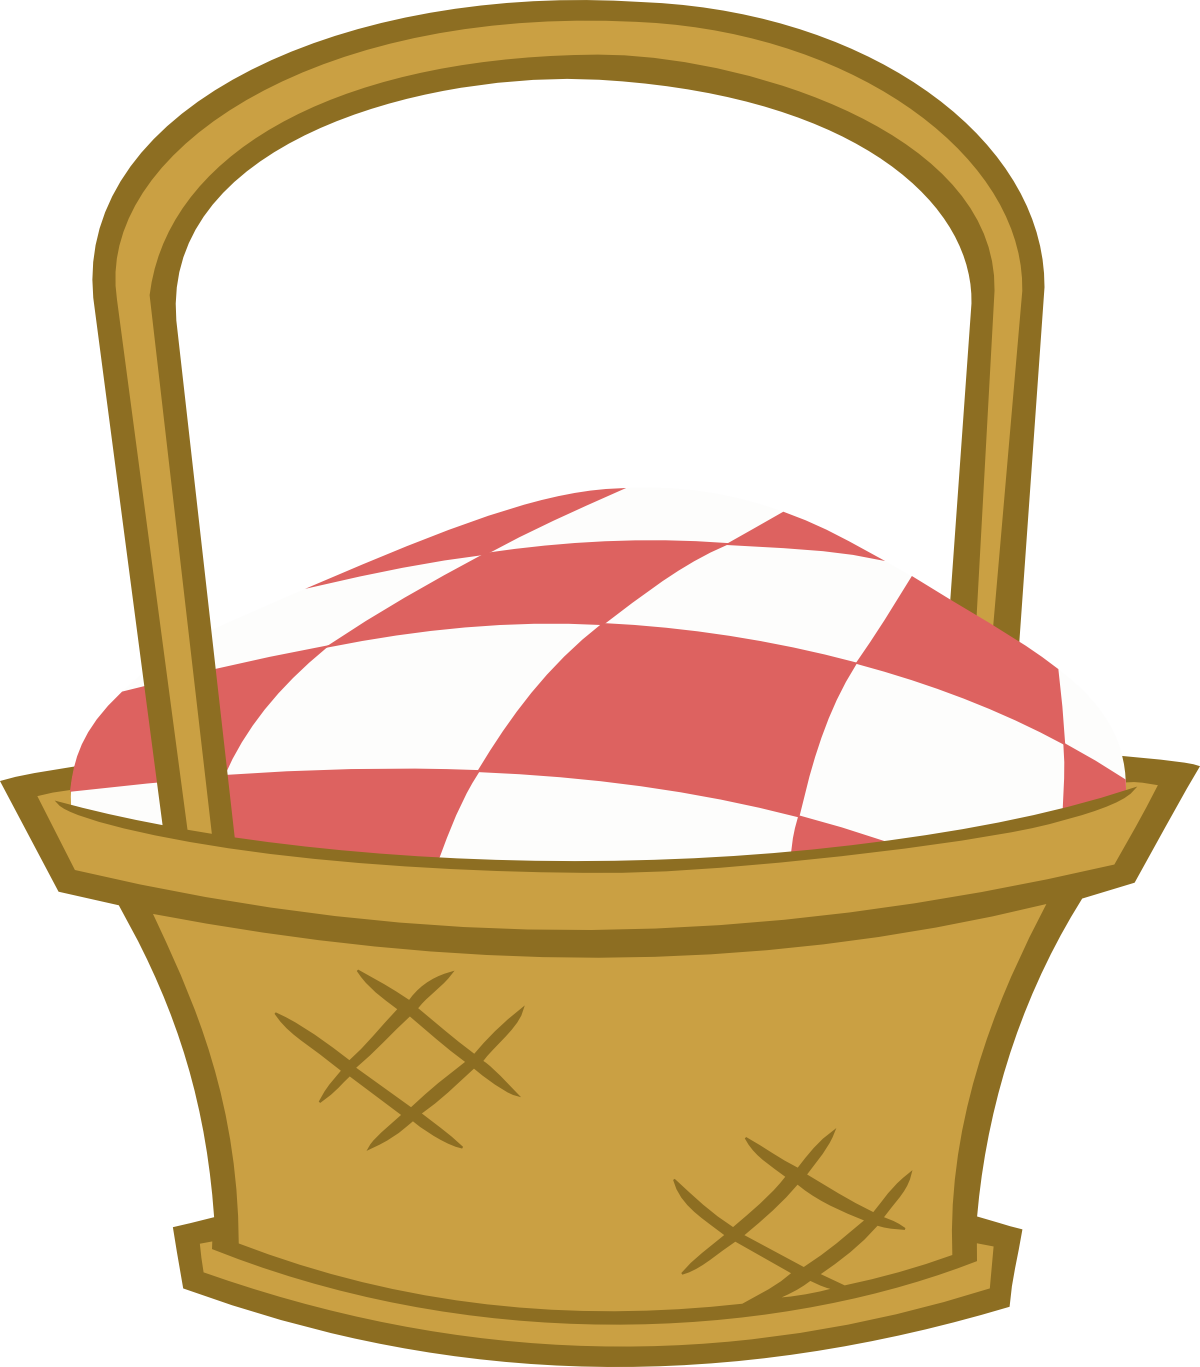 Images For Cartoon Picnic Basket - Little Red Riding Hood Basket Clipart (1200x1367)